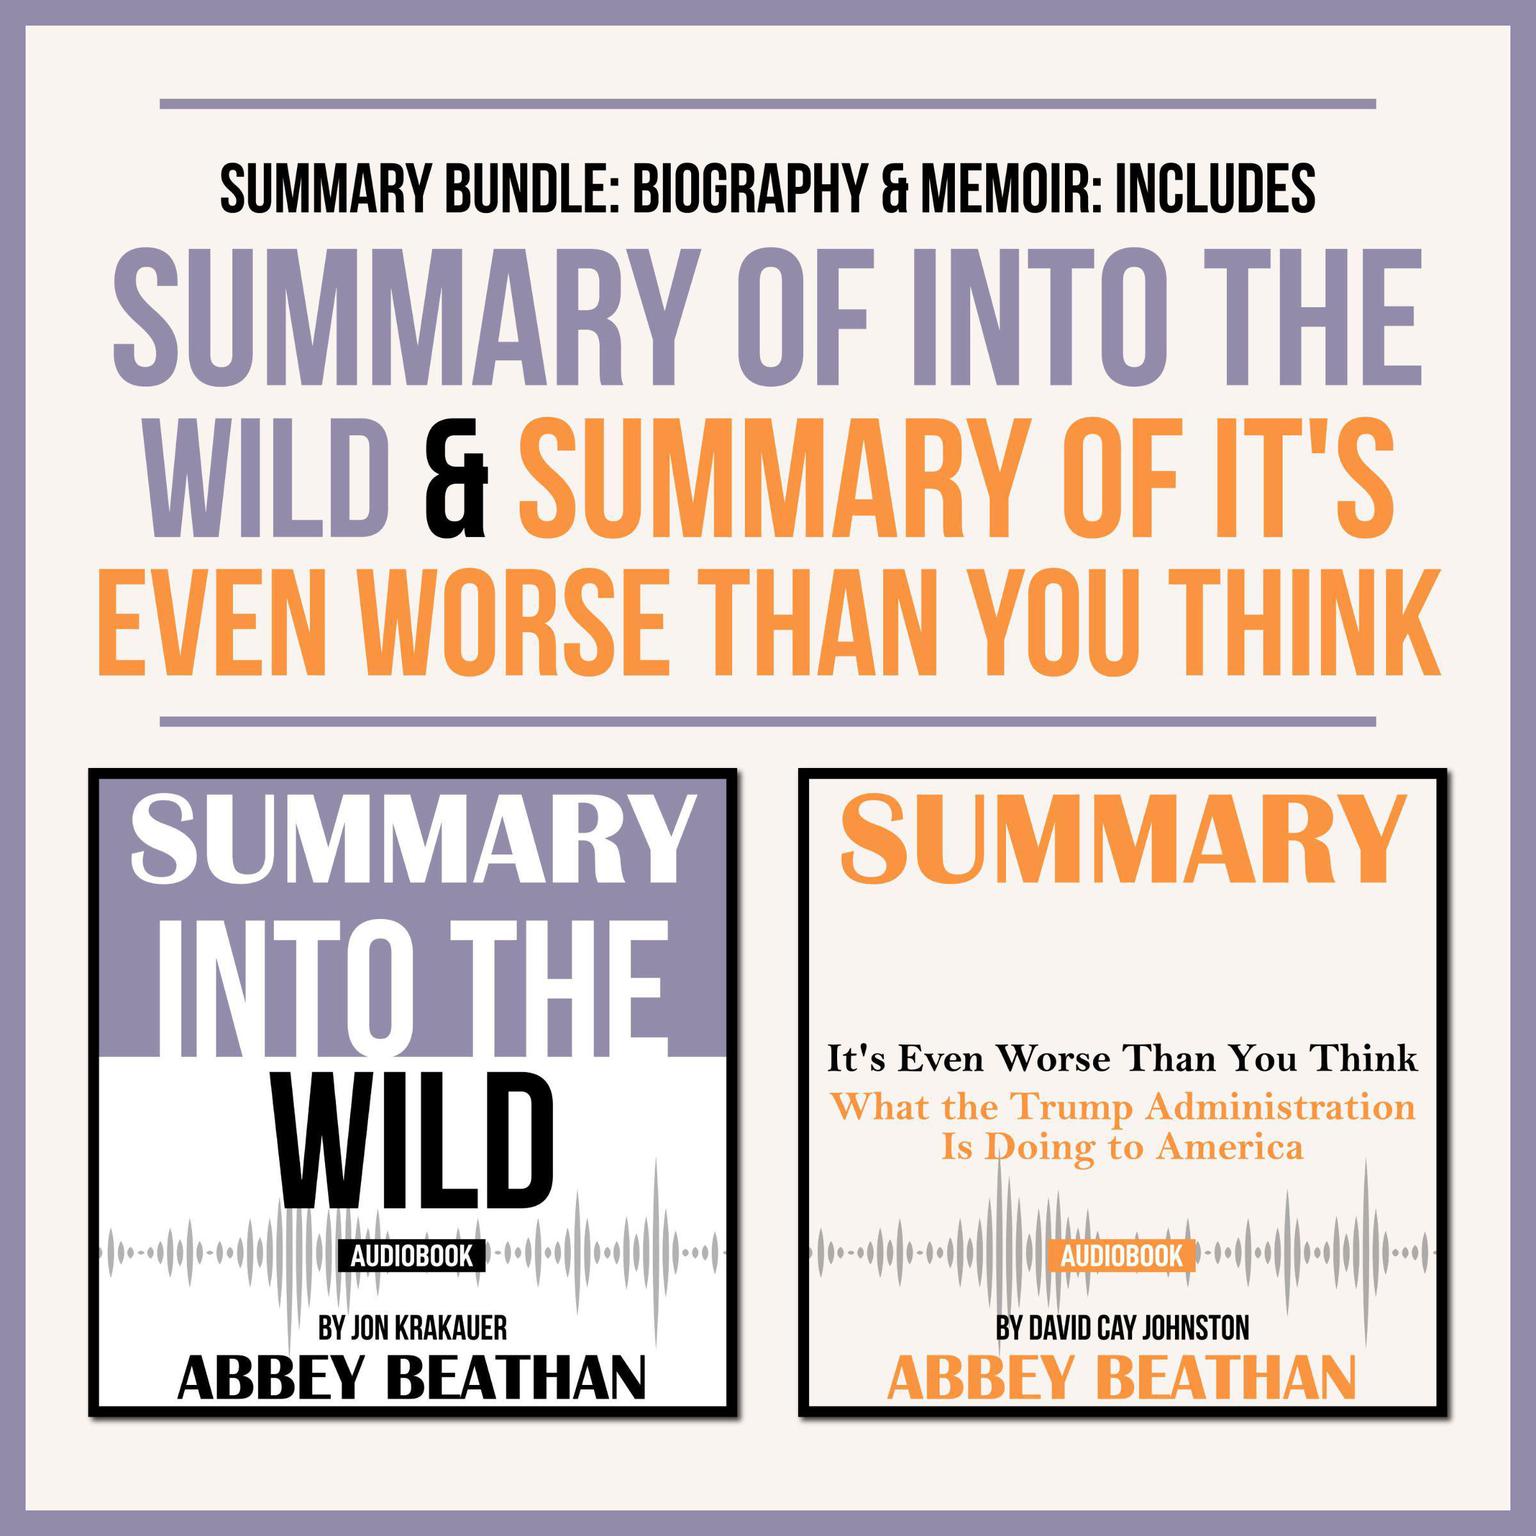 Summary Bundle: Biography & Memoir: Includes Summary of Into the Wild & Summary of Its Even Worse Than You Think Audiobook, by Abbey Beathan